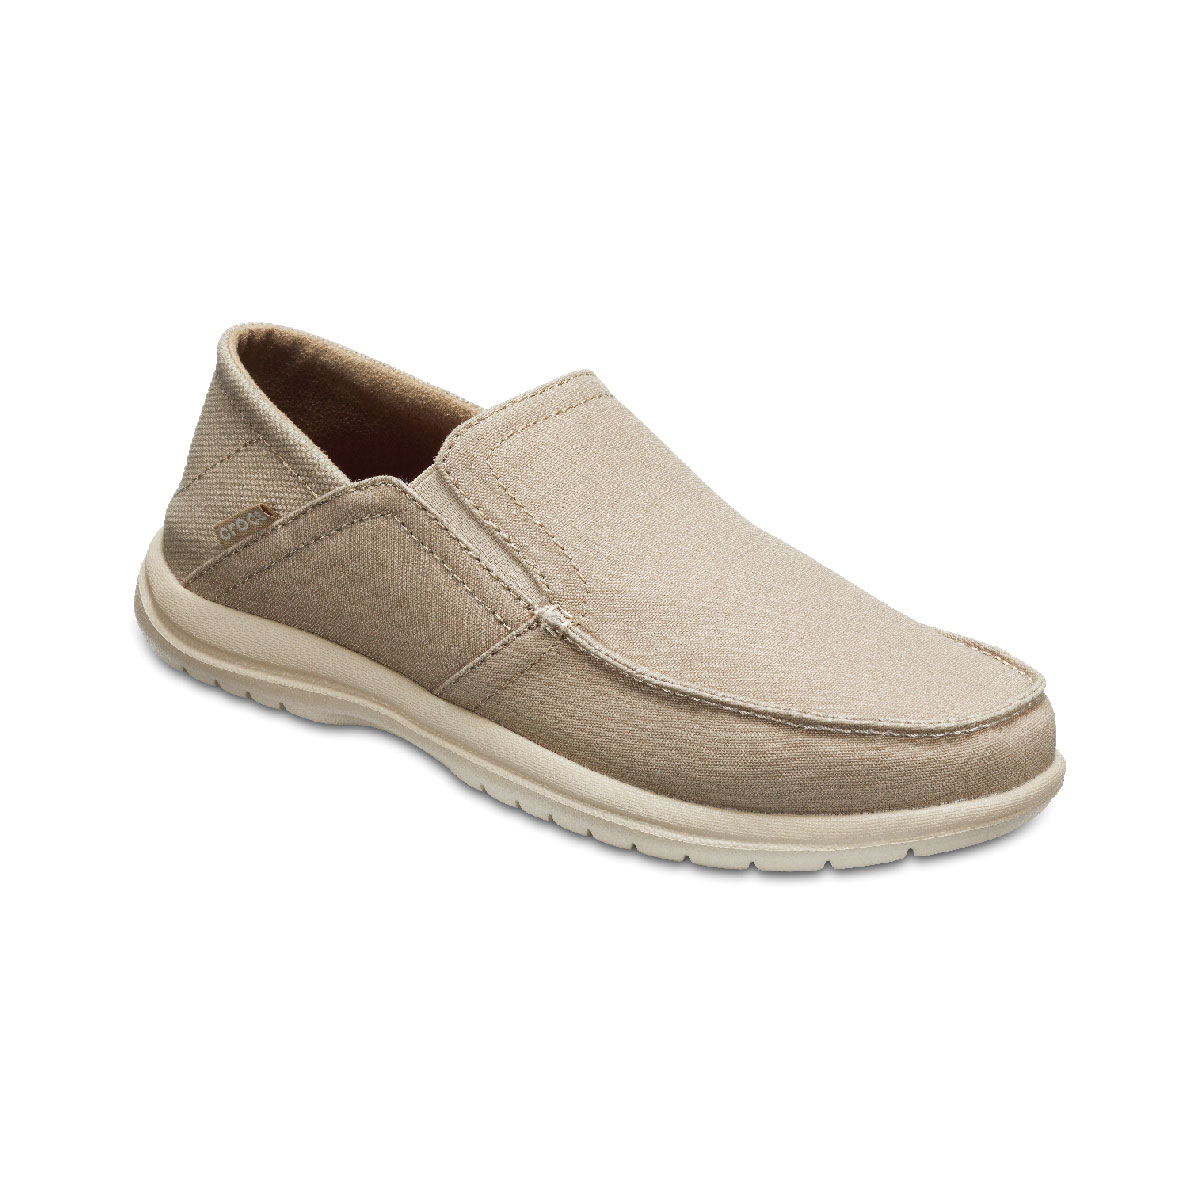 Light brown loafers